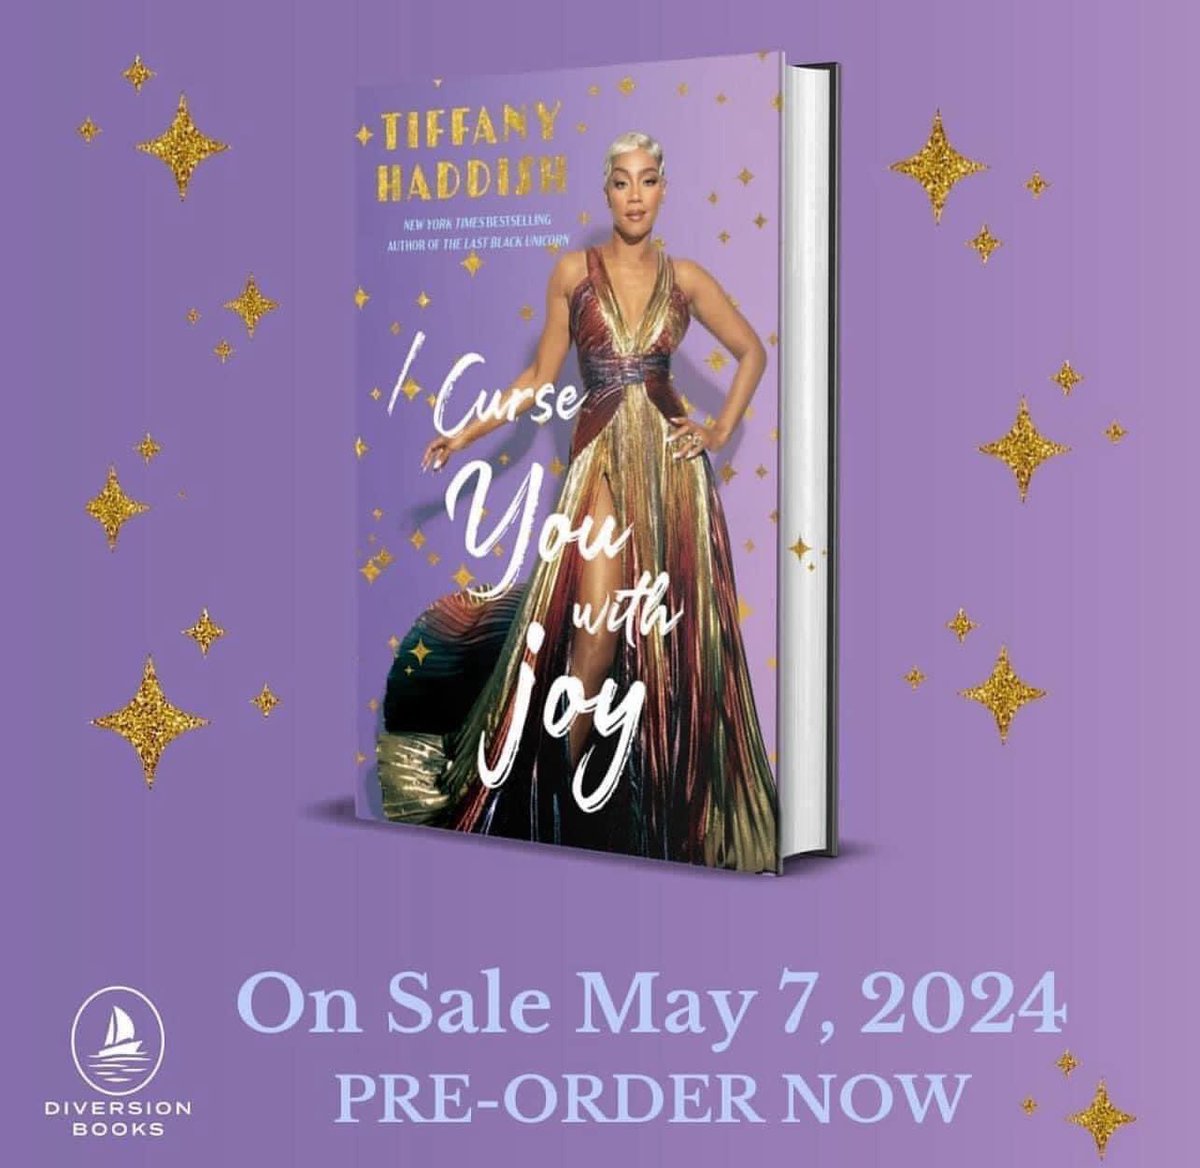 ✨⭐️✨
ON SALE MAY 7th 2024
“I CURSE YOU WITH JOY”
NEW BOOK BY @tiffanyhaddish 📕
“IN MORE THAN A DOZEN STORIES
TIFFANY HADDISH IS CANDID
ABOUT HER HIGHS, LOWS AND
EVERYTHING IN BETWEEN”

PRE ORDER YOUR COPY NOW👇🏾
tiffanyhaddish.com

#author #book #icurseyouwithjoy #story